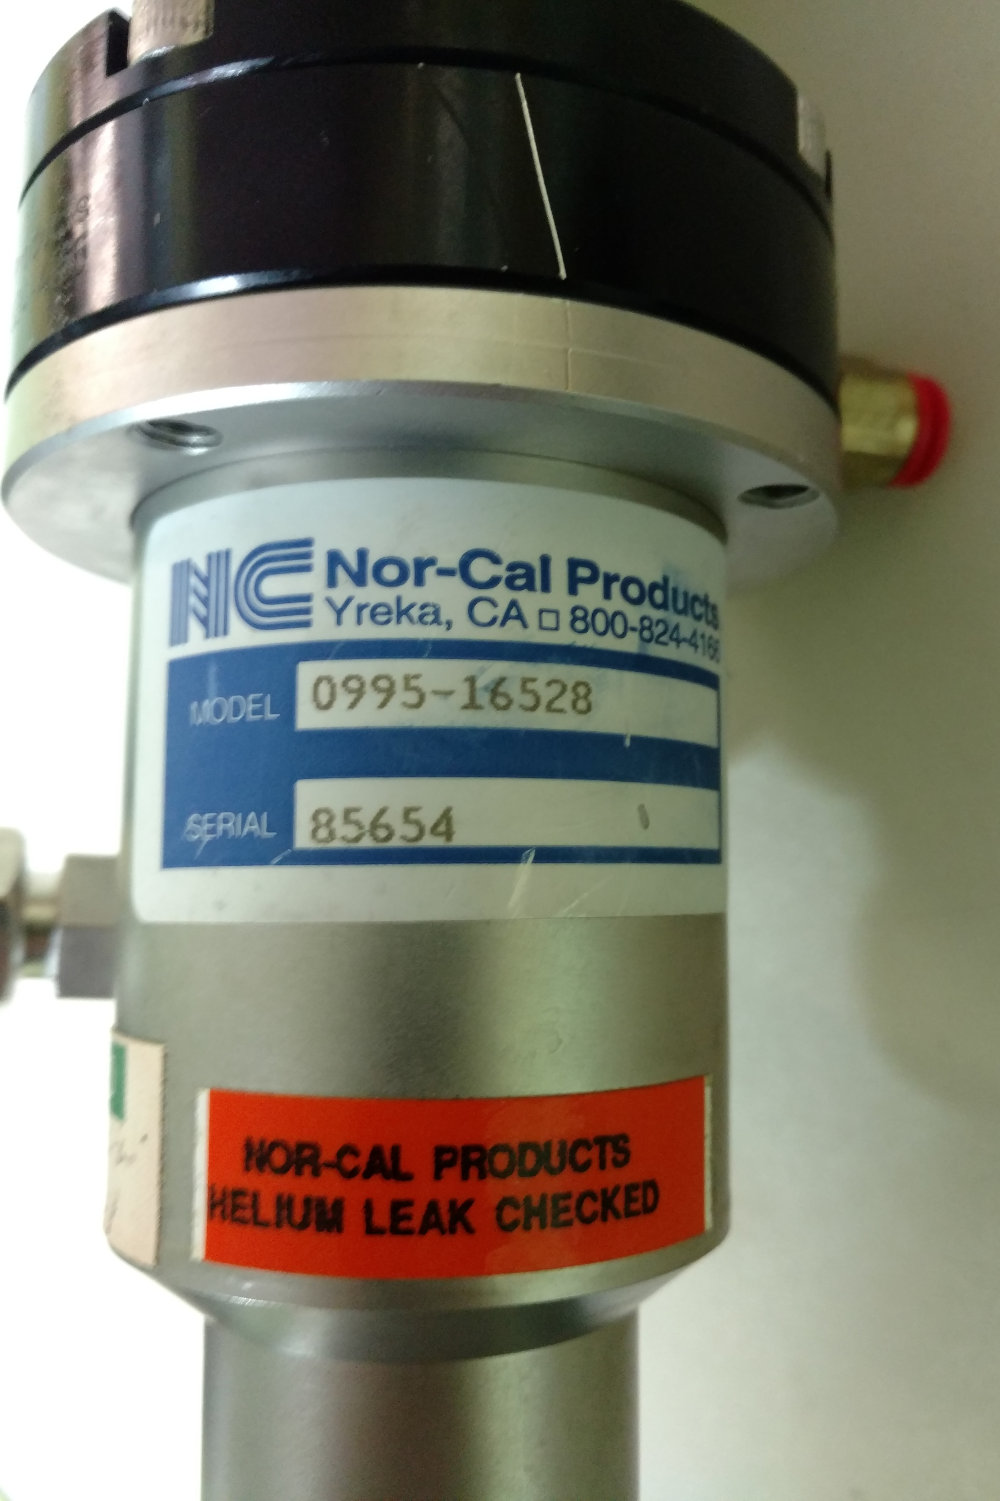 NC NOR-CAL PRODUCTS 0995-16528